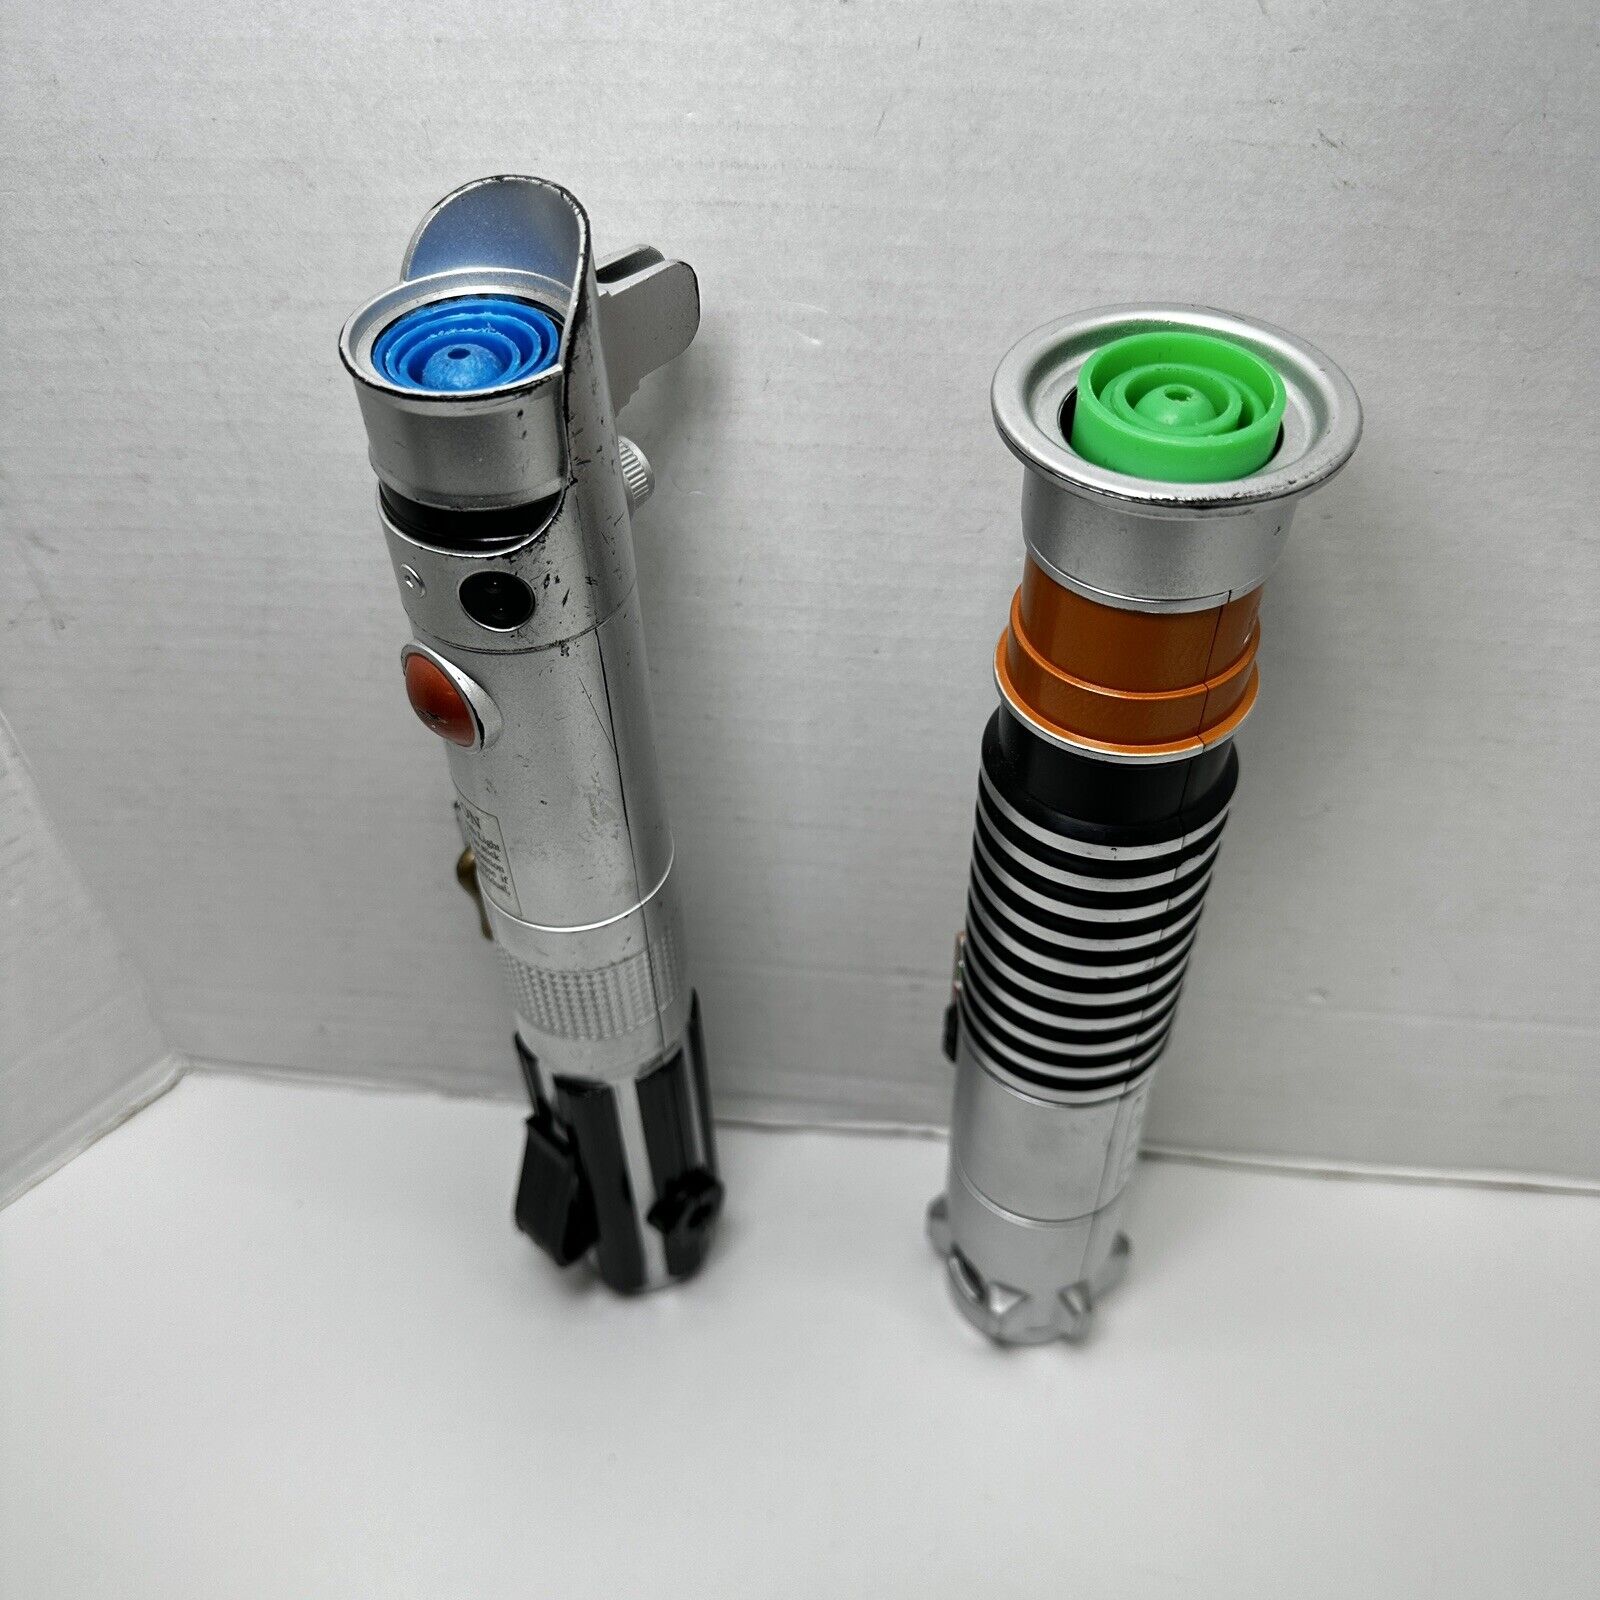 Hasbro Star Wars Lightsaber Lot of 2 Green and Blue - Non Electric